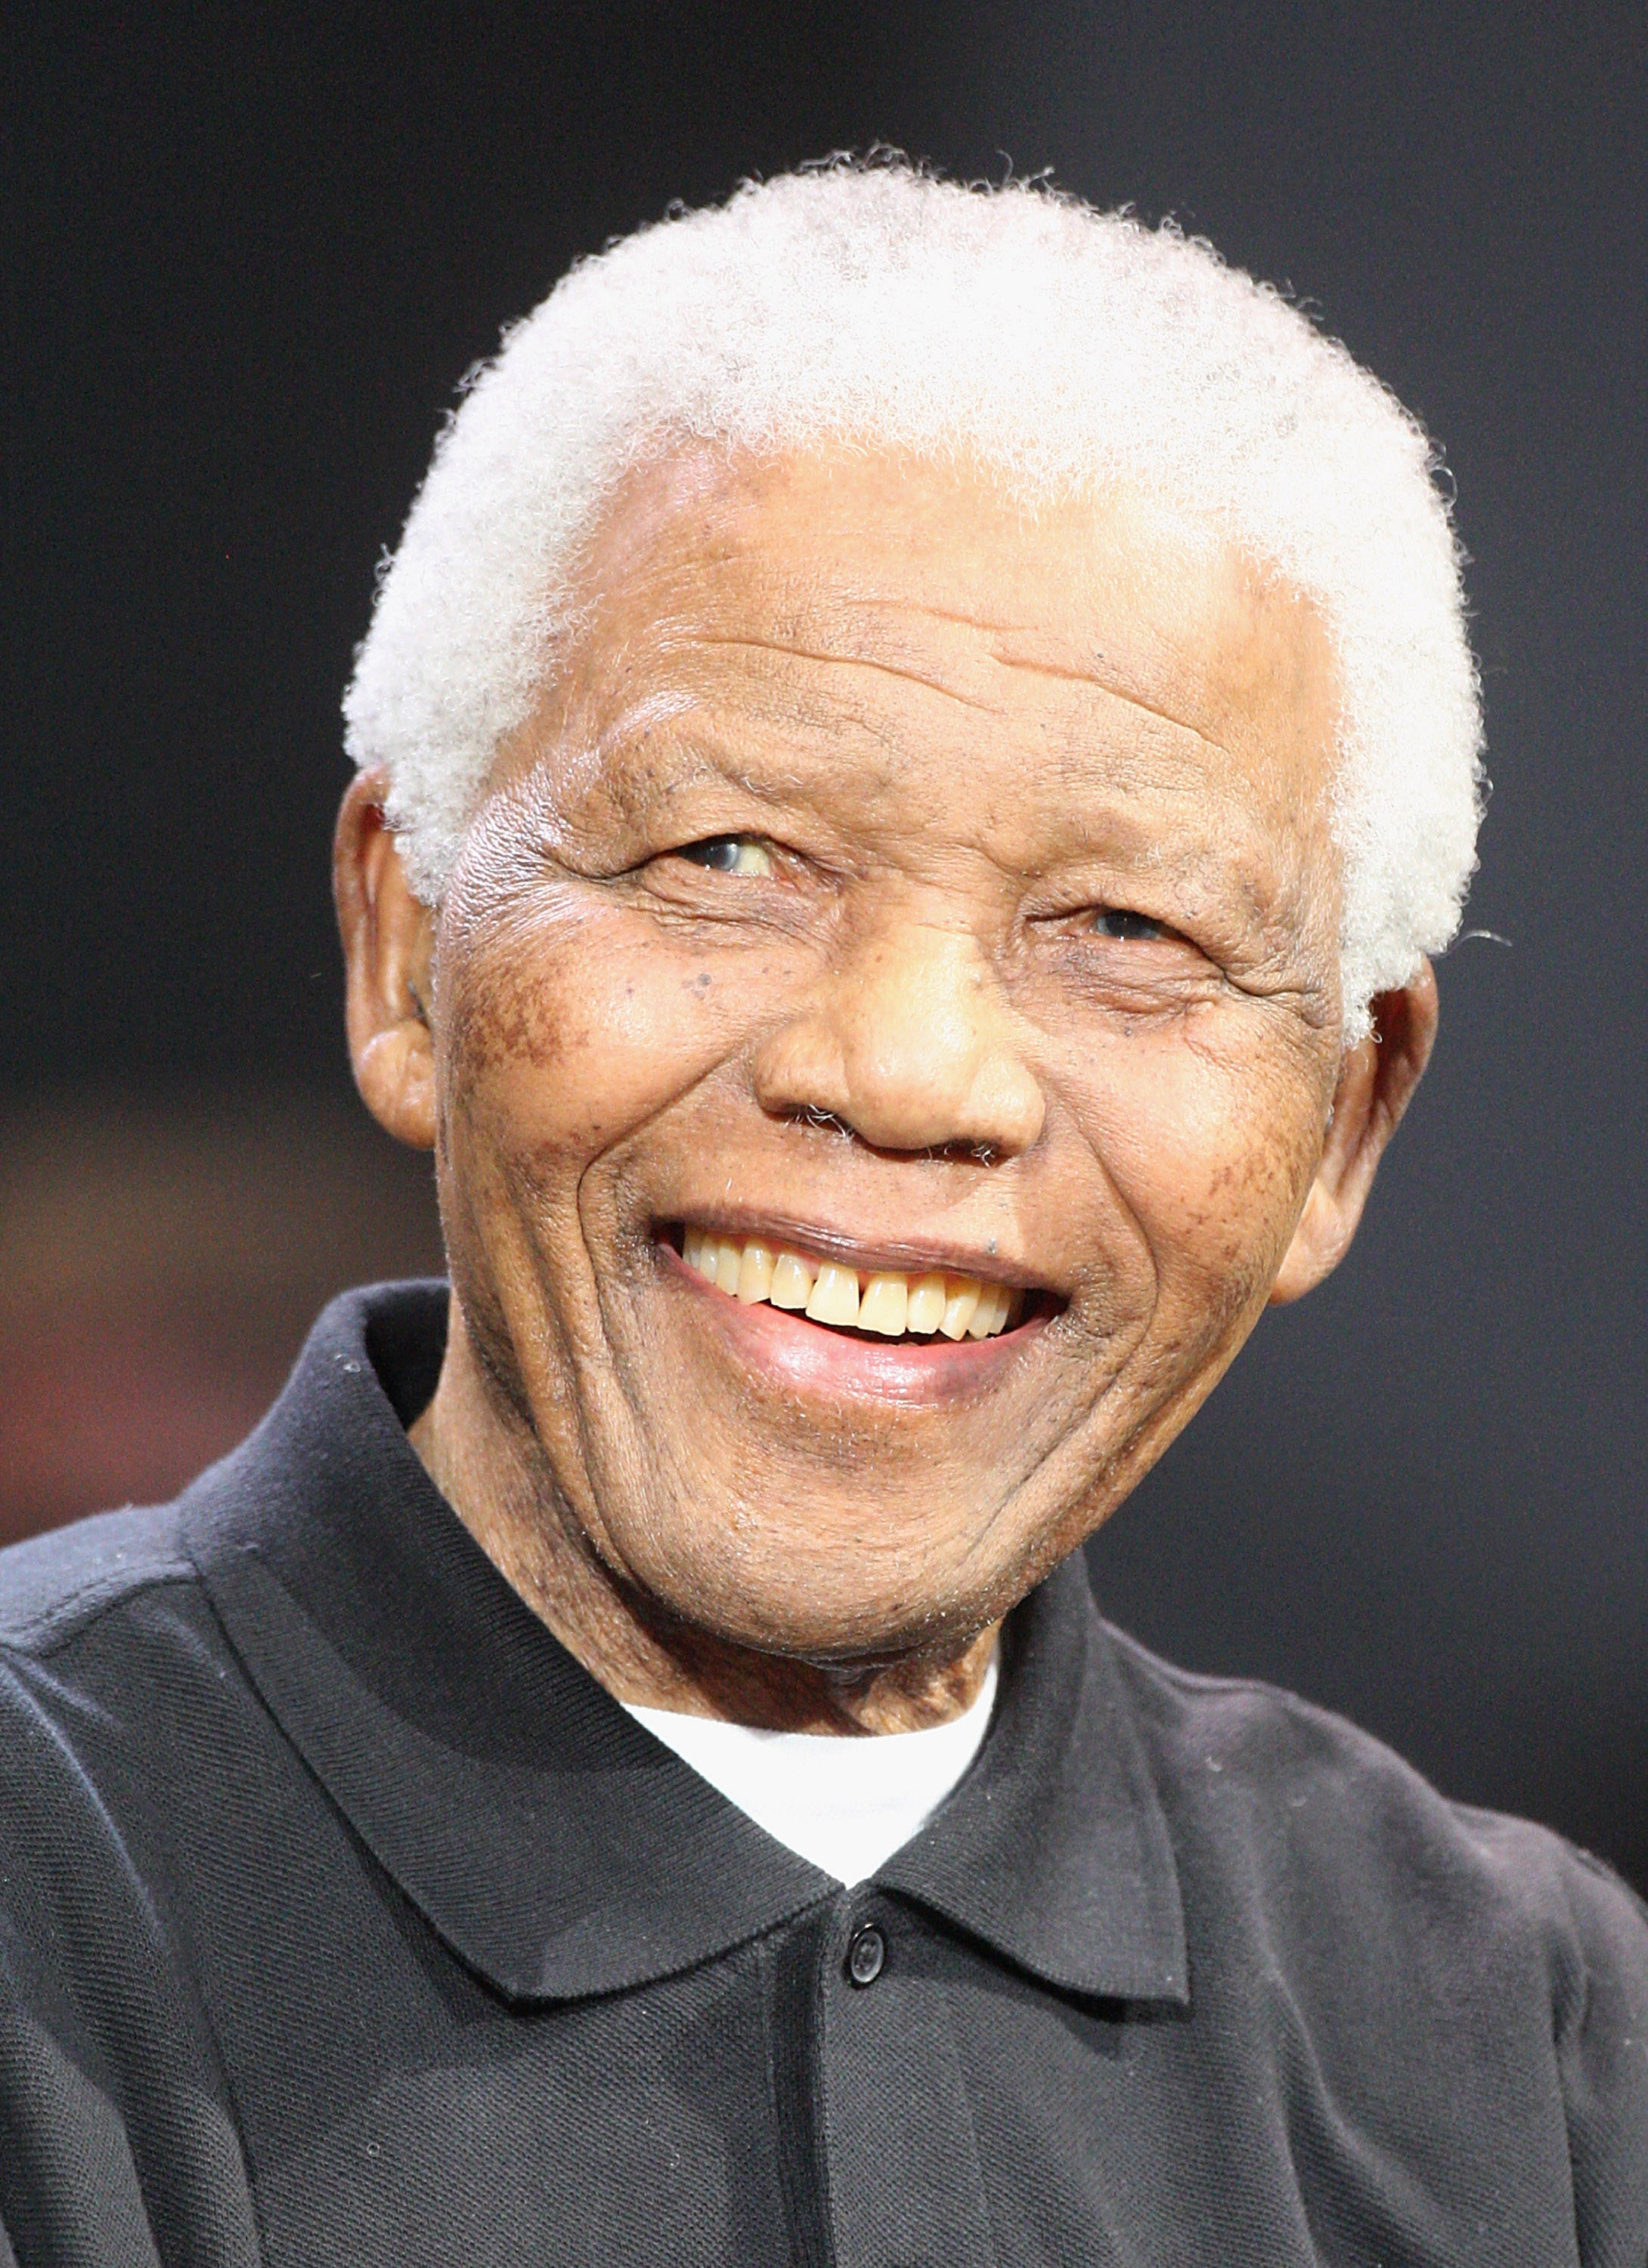 Presidents, royalty expected for Mandela memorial; starts at 1 a.m. PST Tuesday on TV